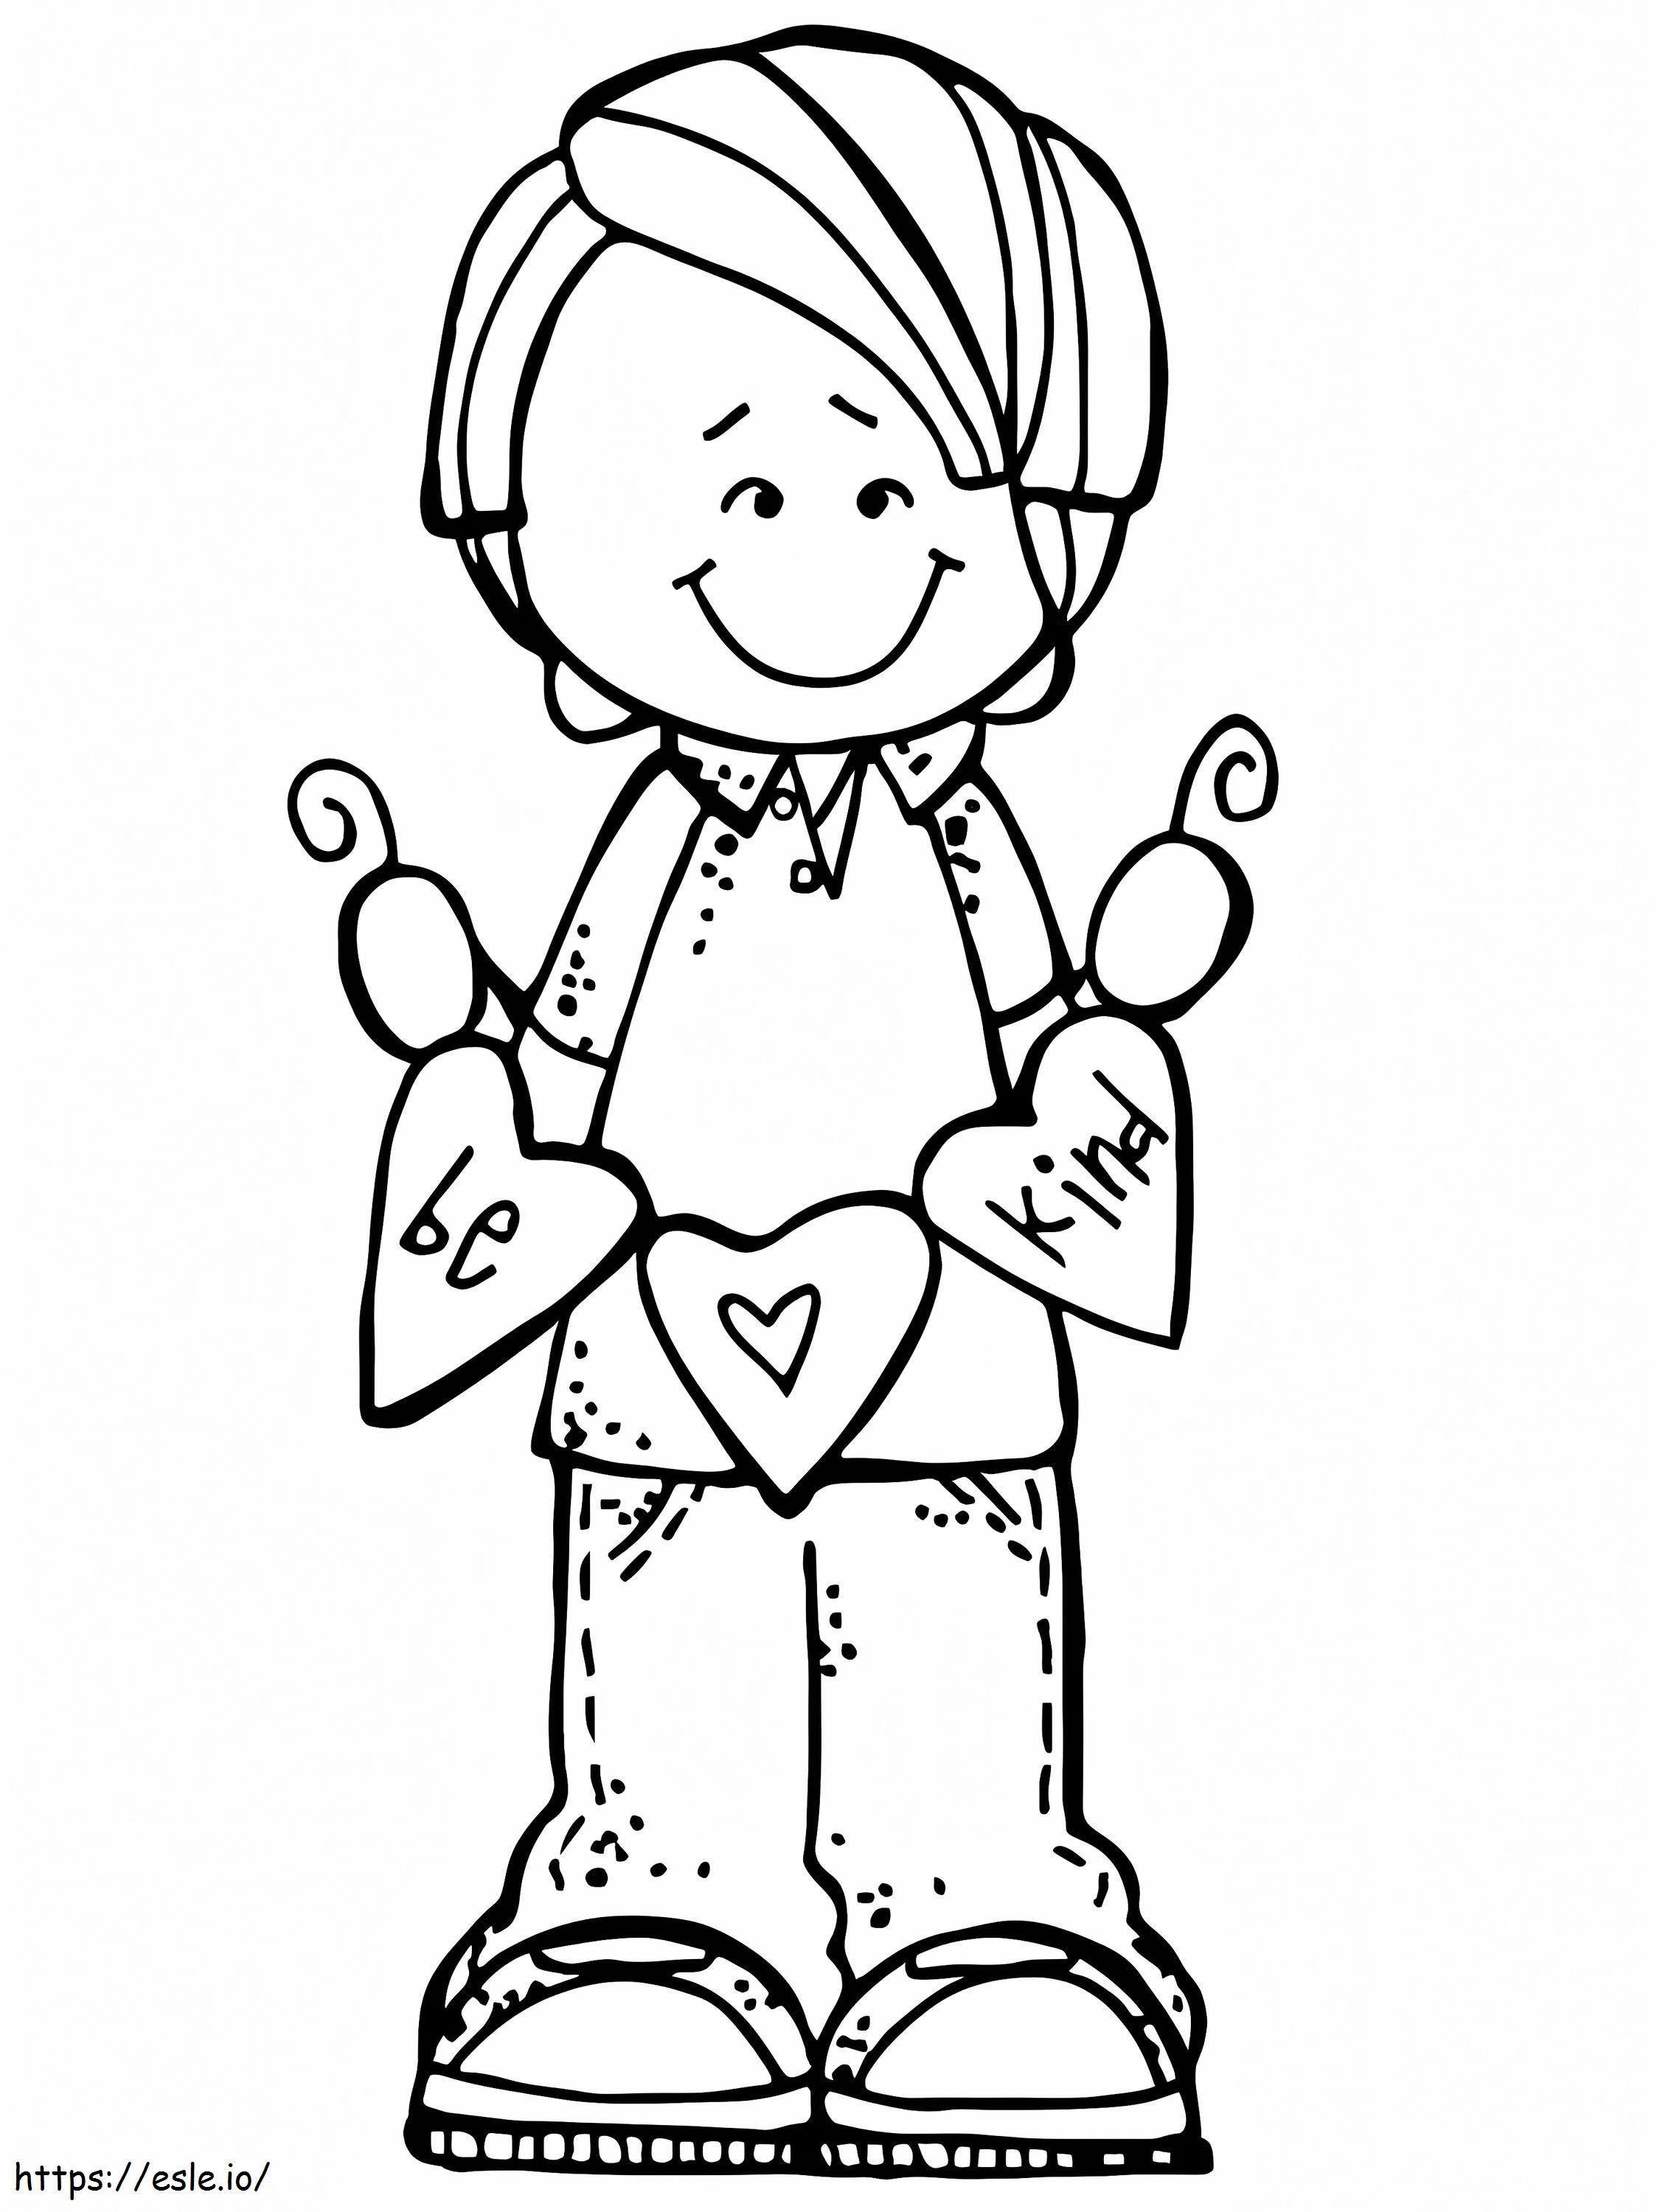 Be Kind Melonheadz coloring page